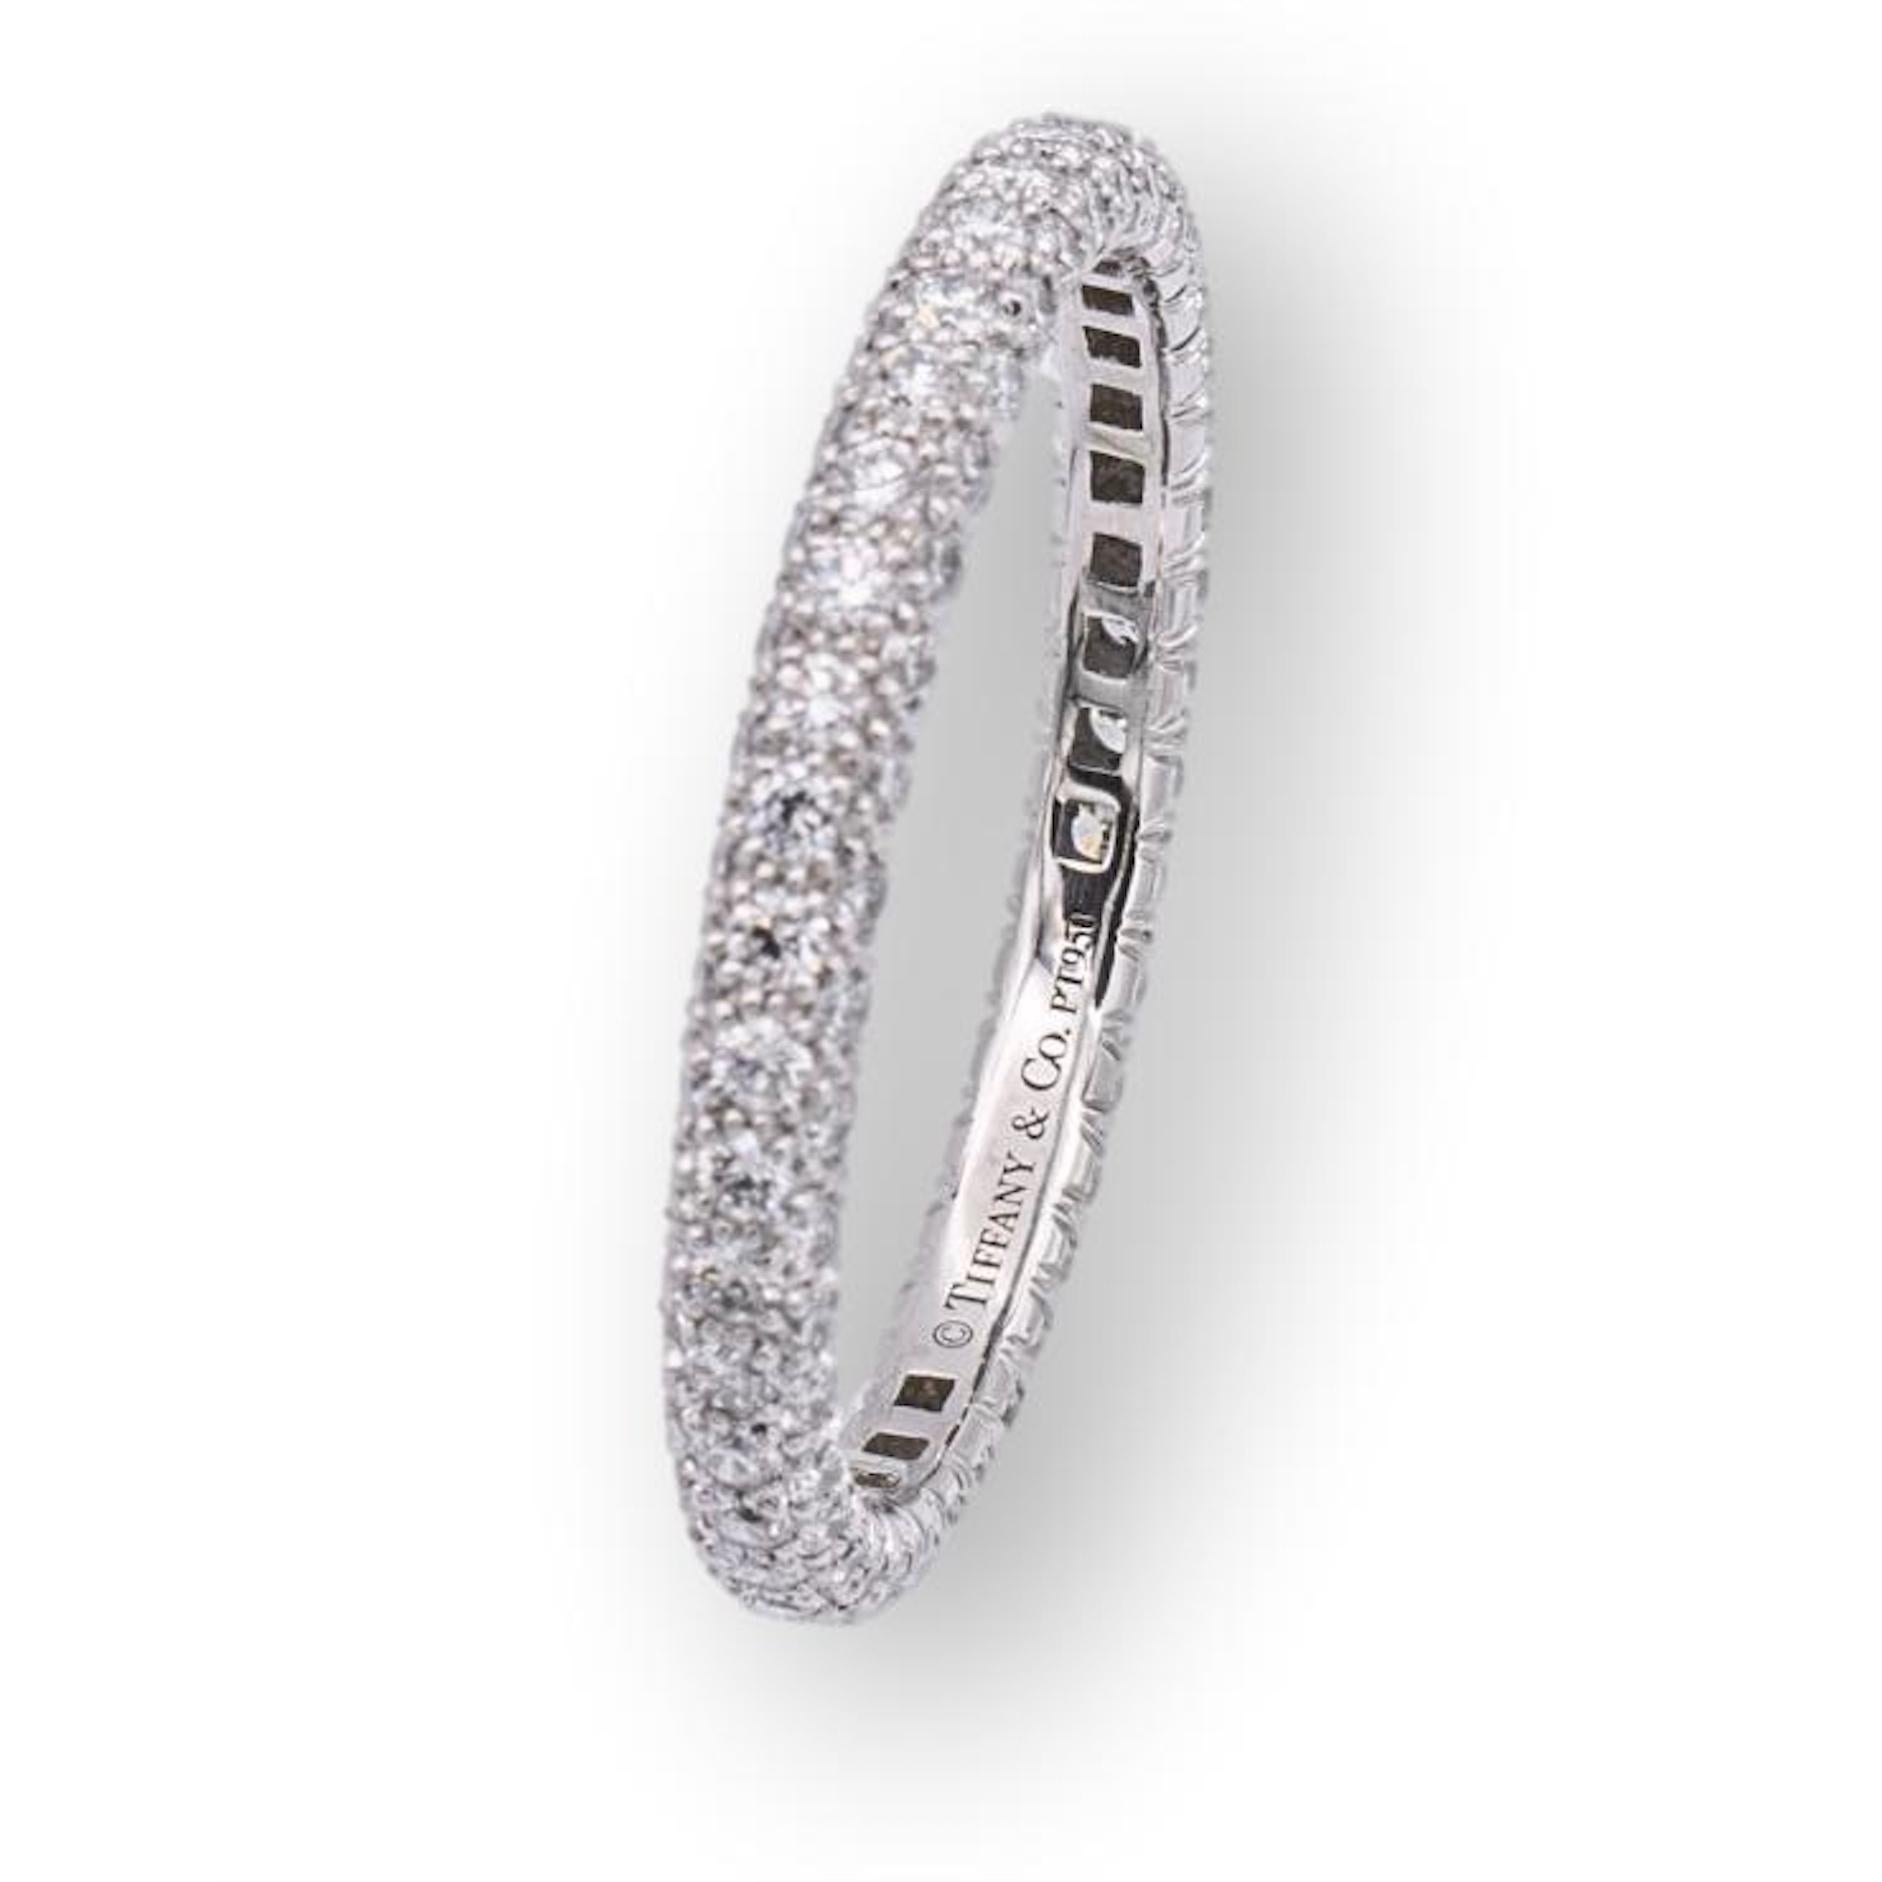 Tiffany & Co. pave band ring from the Etoile collection finely crafted in platinum with 120 round brilliant cut diamonds bead set all the way around weighing 1.20 carats total weight, E-F color , VS1-VS2 clarity. The band features 3 rows of diamonds